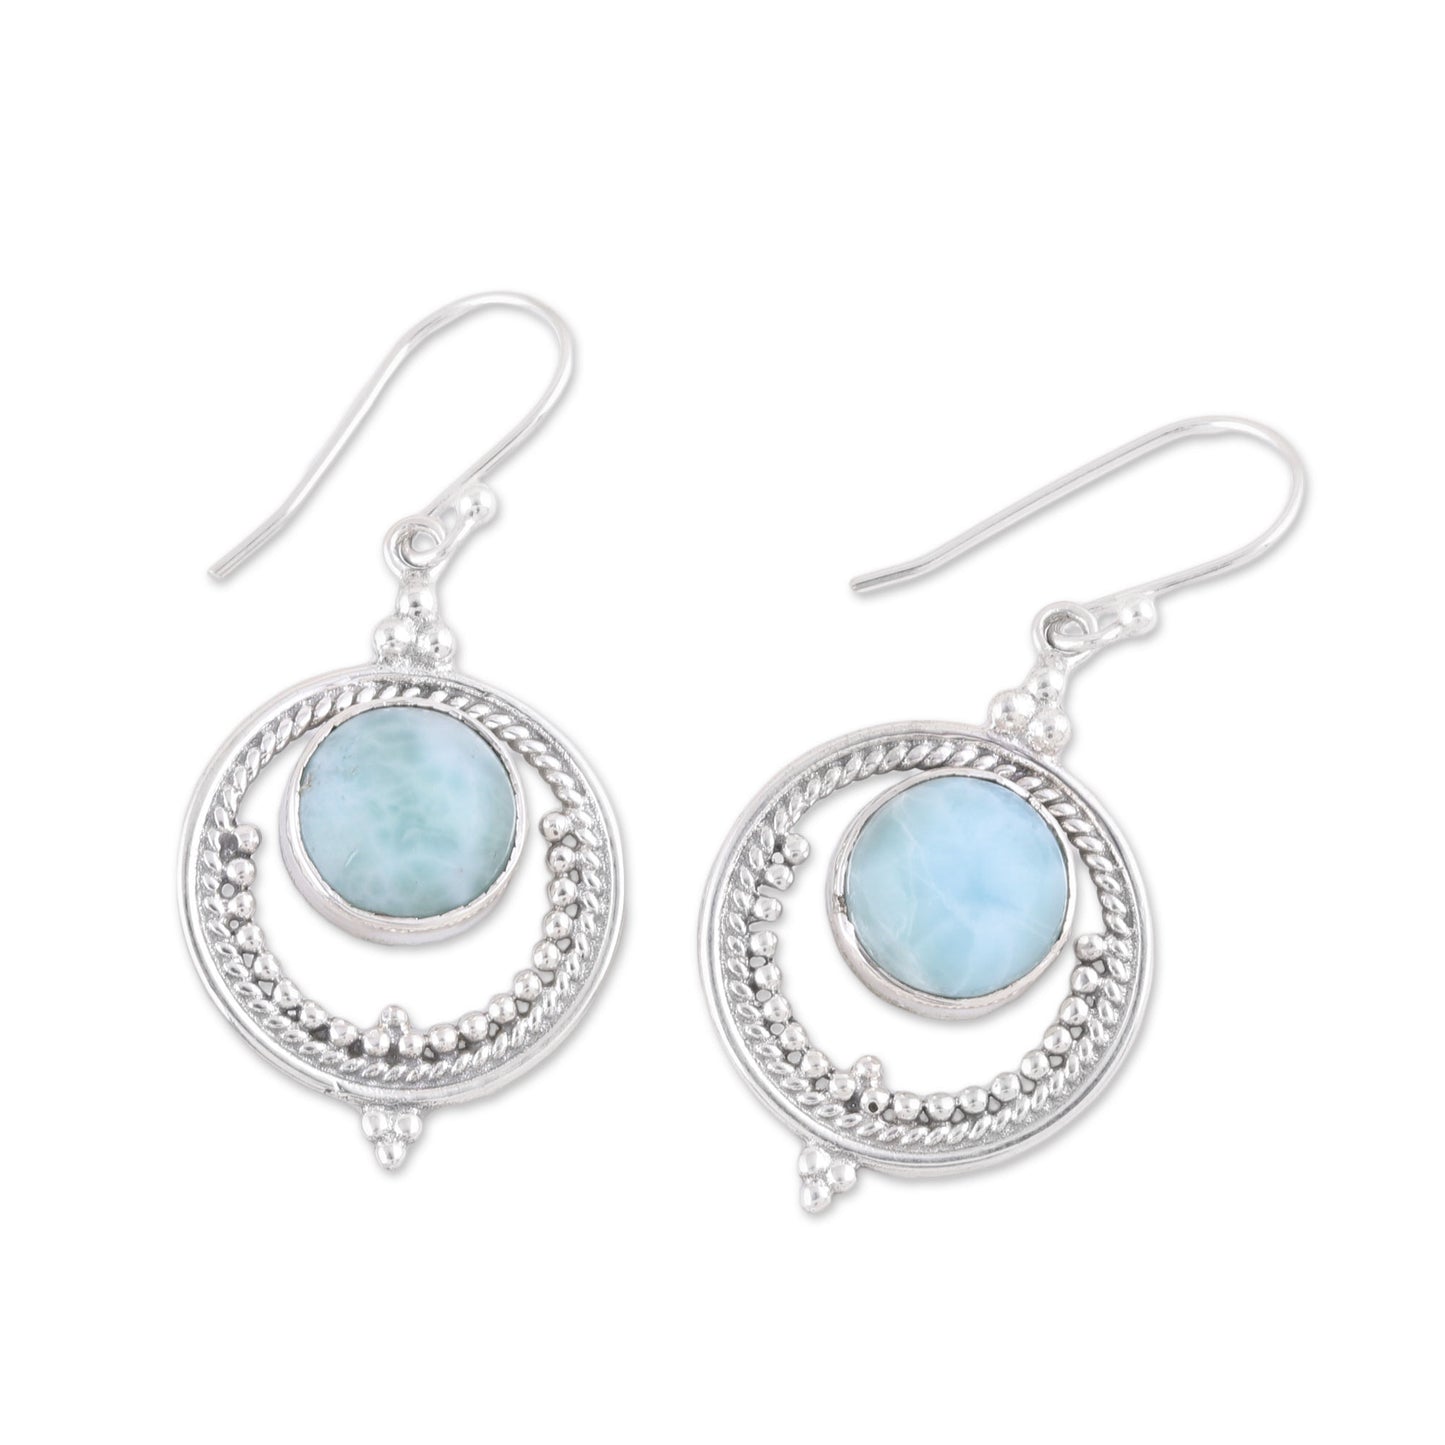 Lunar Delight Larimar and Sterling Silver Dangle Earrings from India